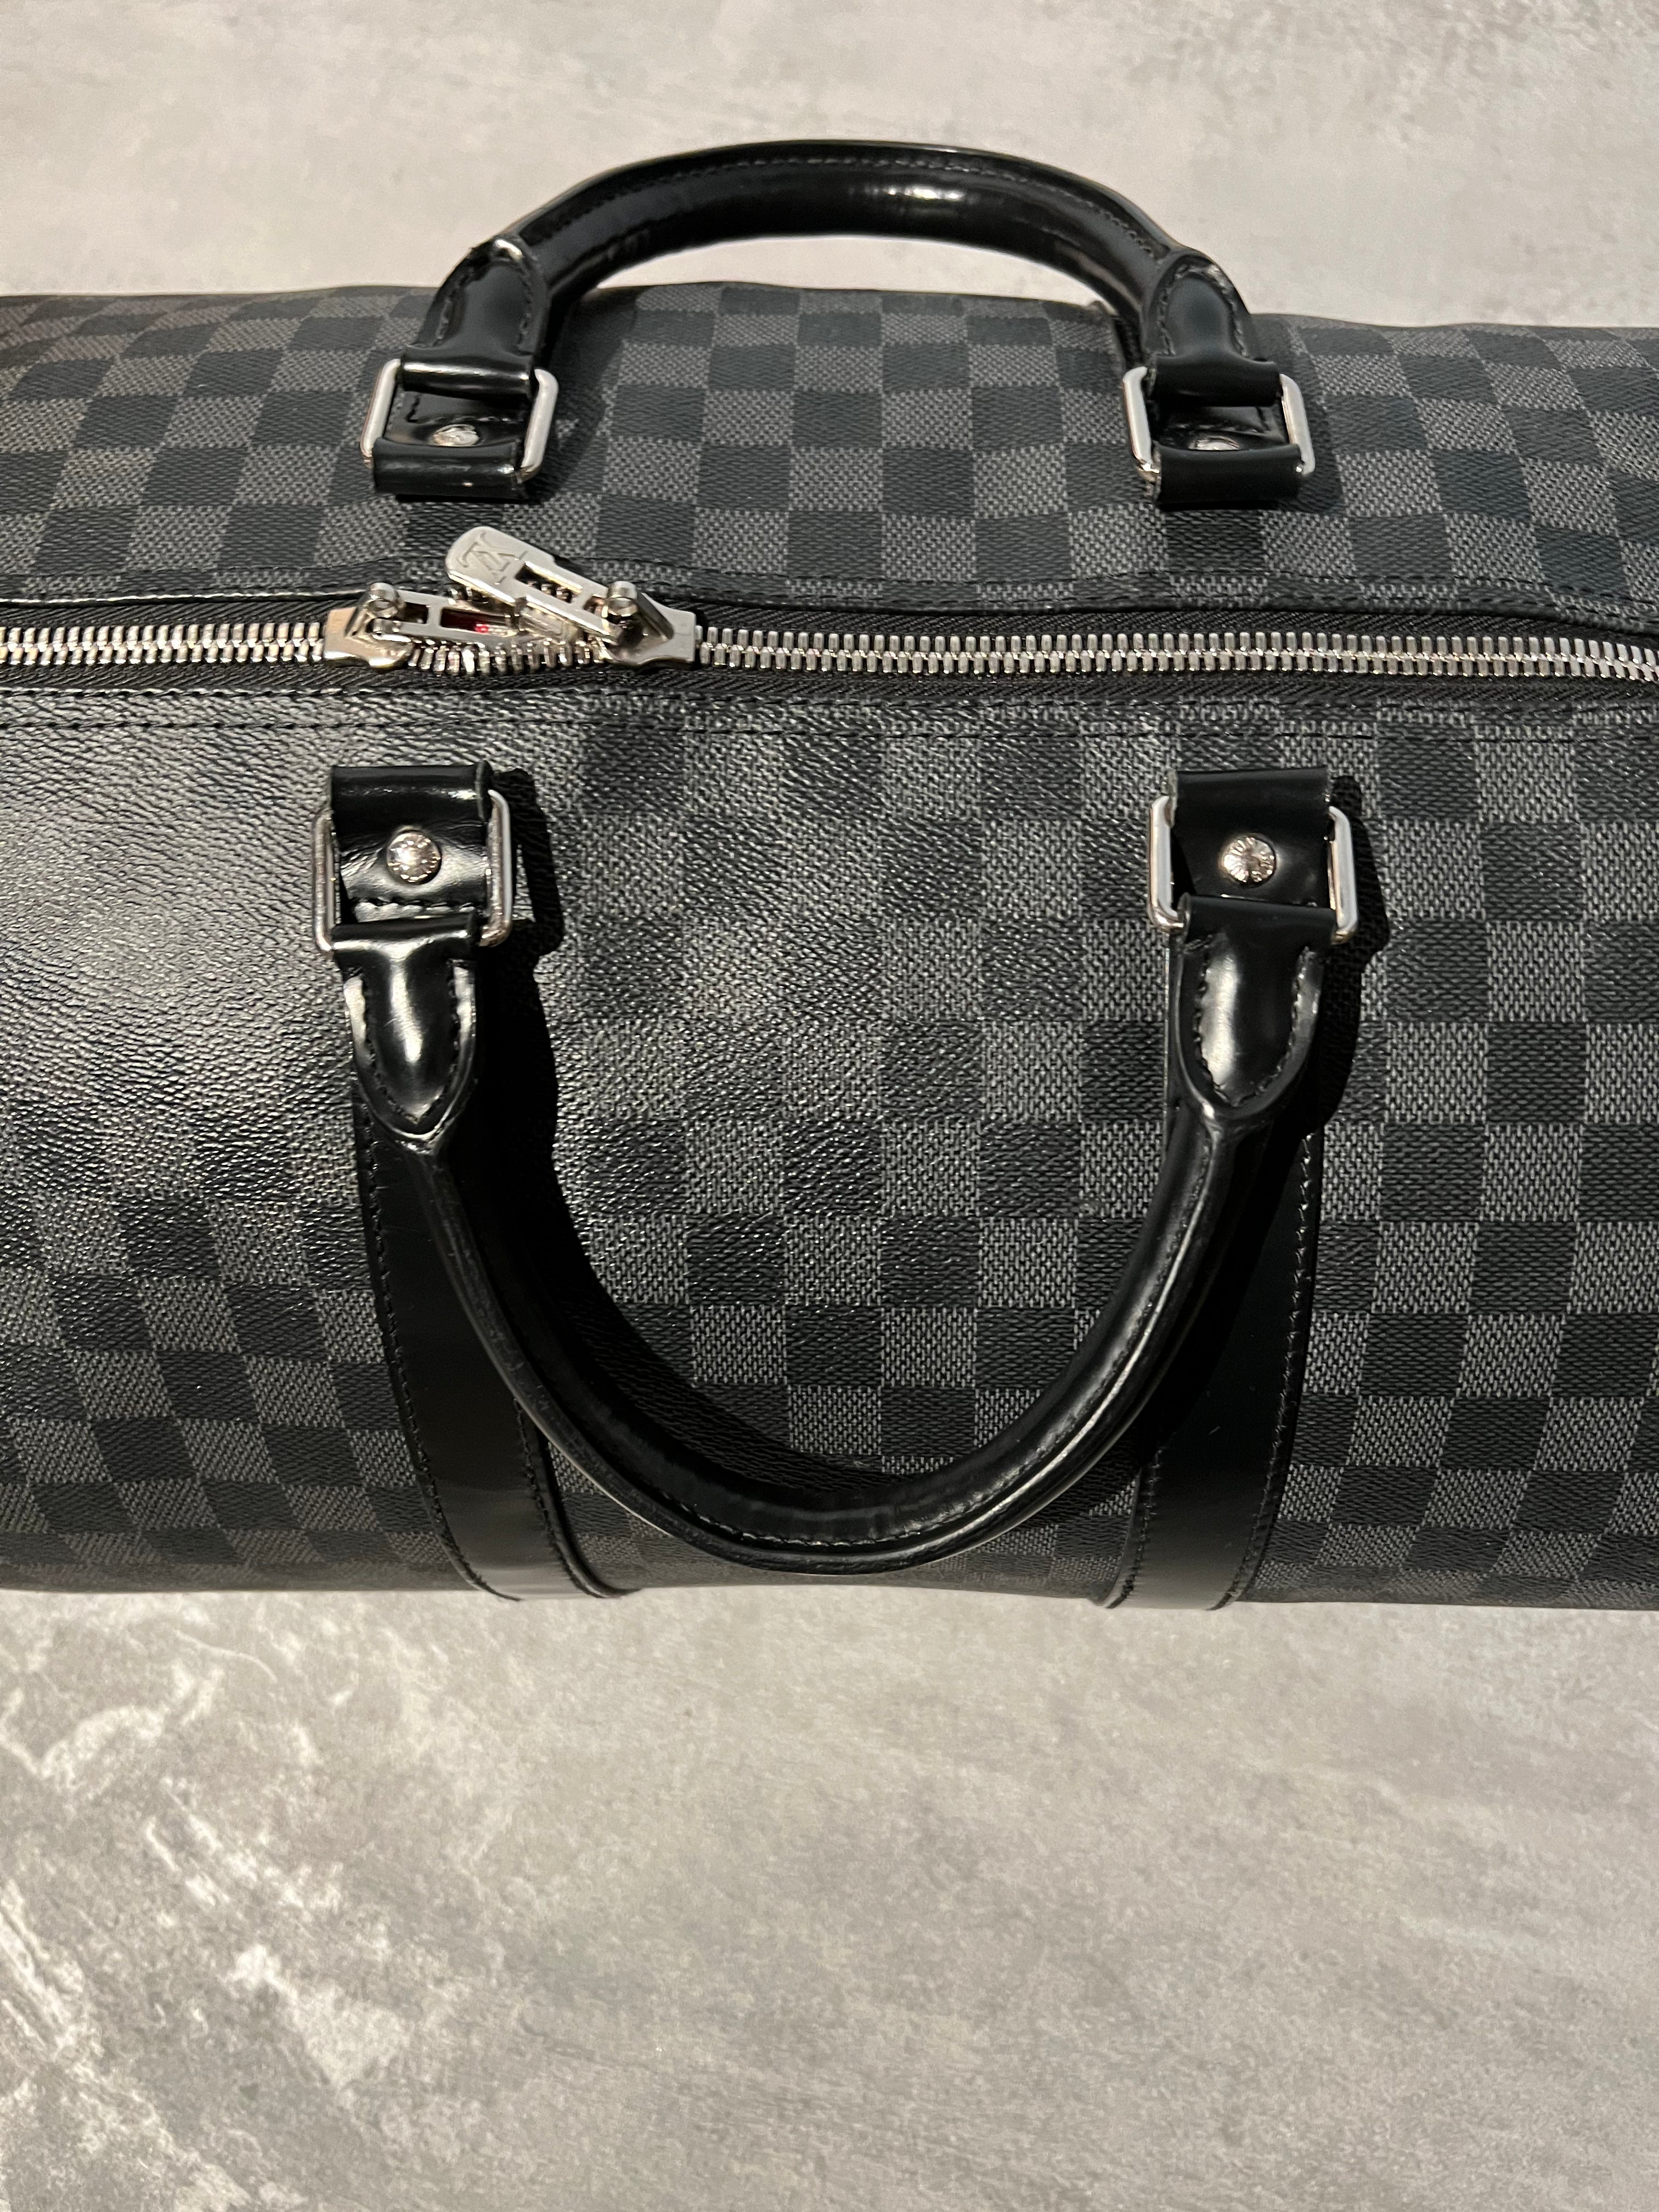 First time LV owner here. My Keepall Bandoulière 55 seems to